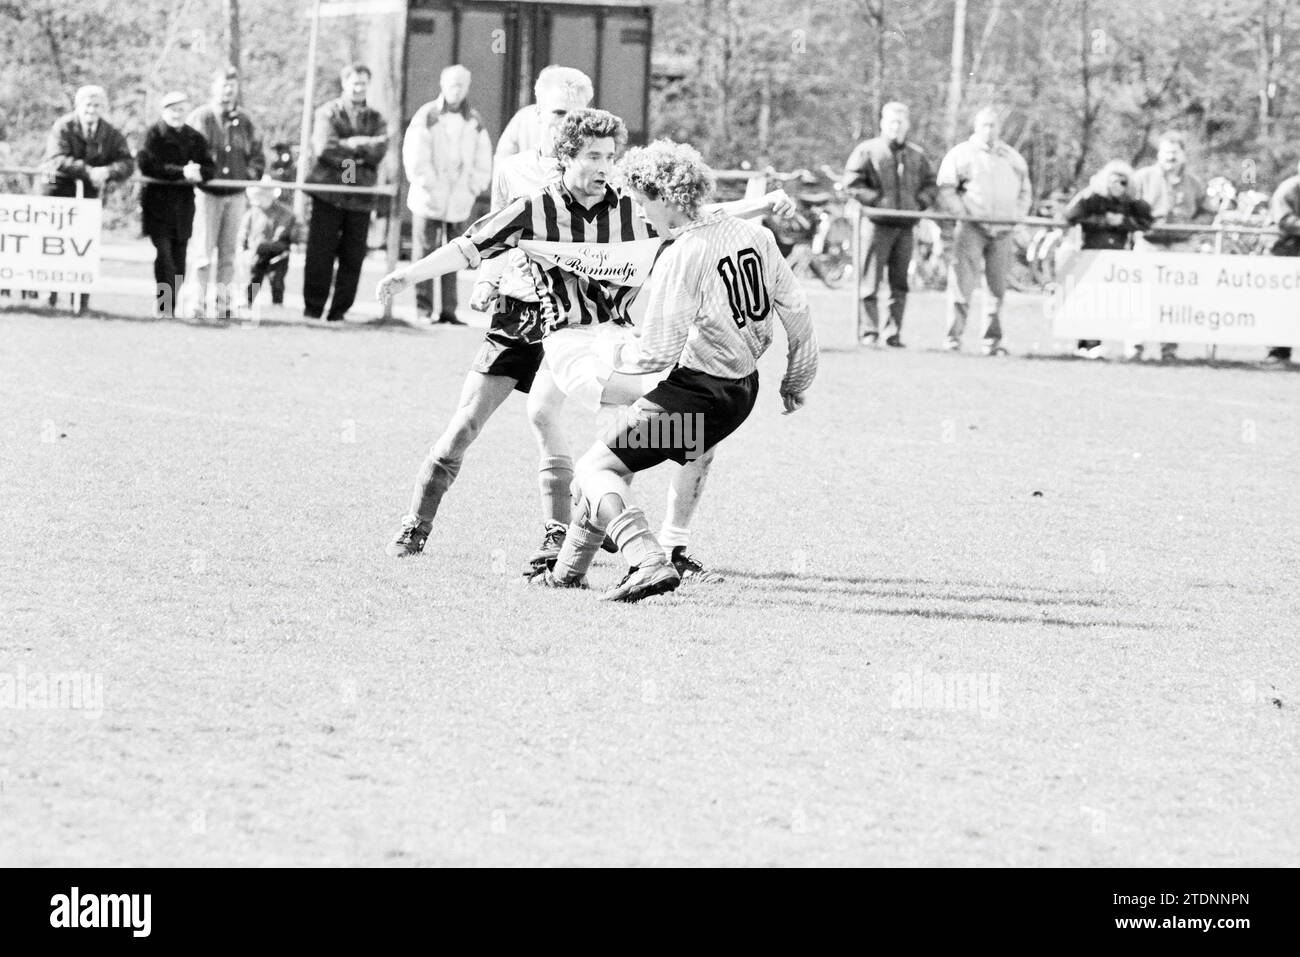 Football, Sizo - RCH, 01-04-1994, Whizgle News from the Past, Tailored for the Future. Explore historical narratives, Dutch The Netherlands agency image with a modern perspective, bridging the gap between yesterday's events and tomorrow's insights. A timeless journey shaping the stories that shape our future Stock Photo